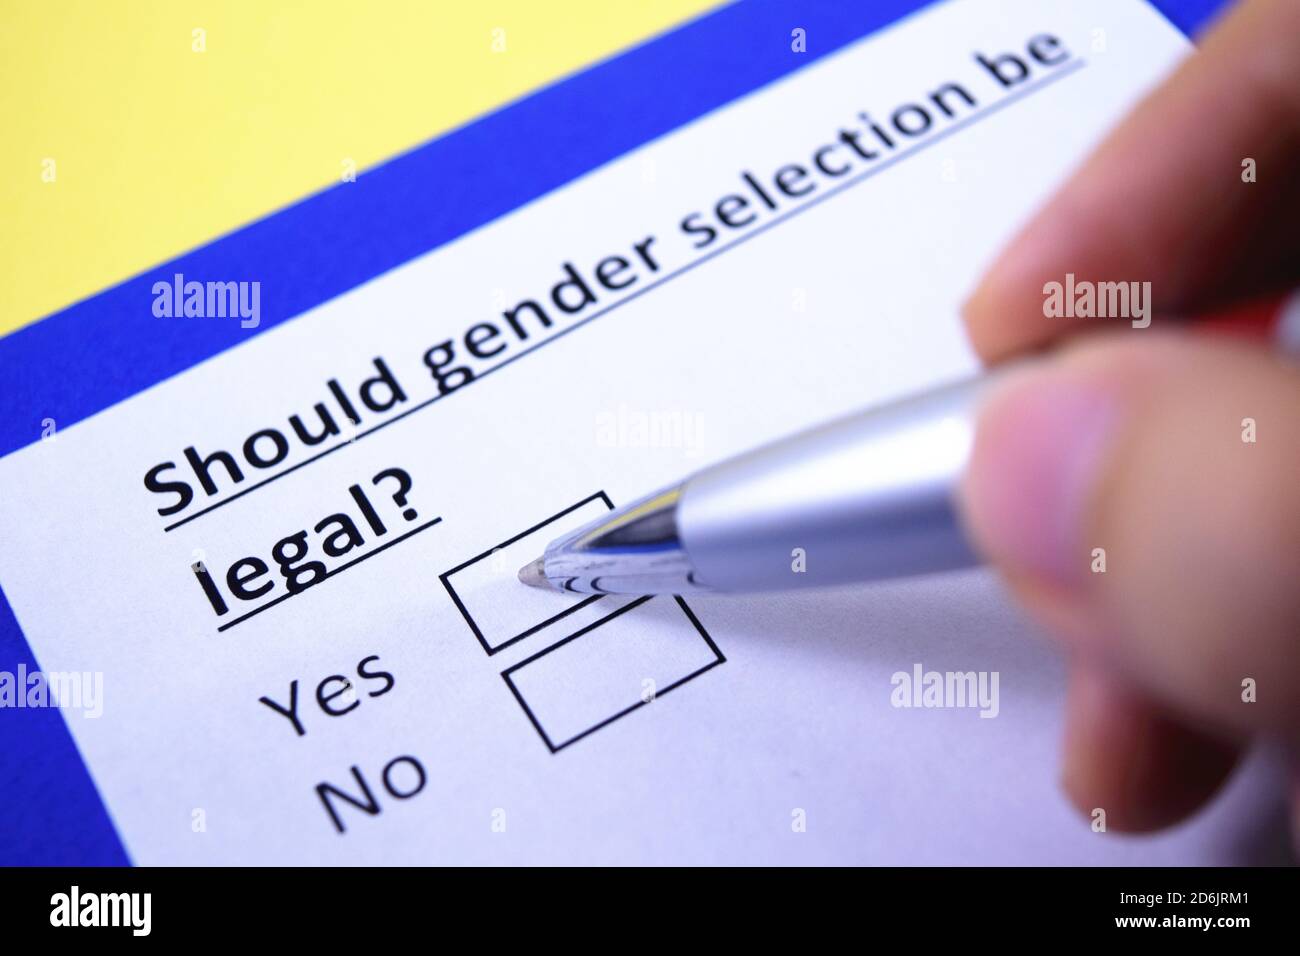 Should gender selection be legal? Yes or no? Stock Photo